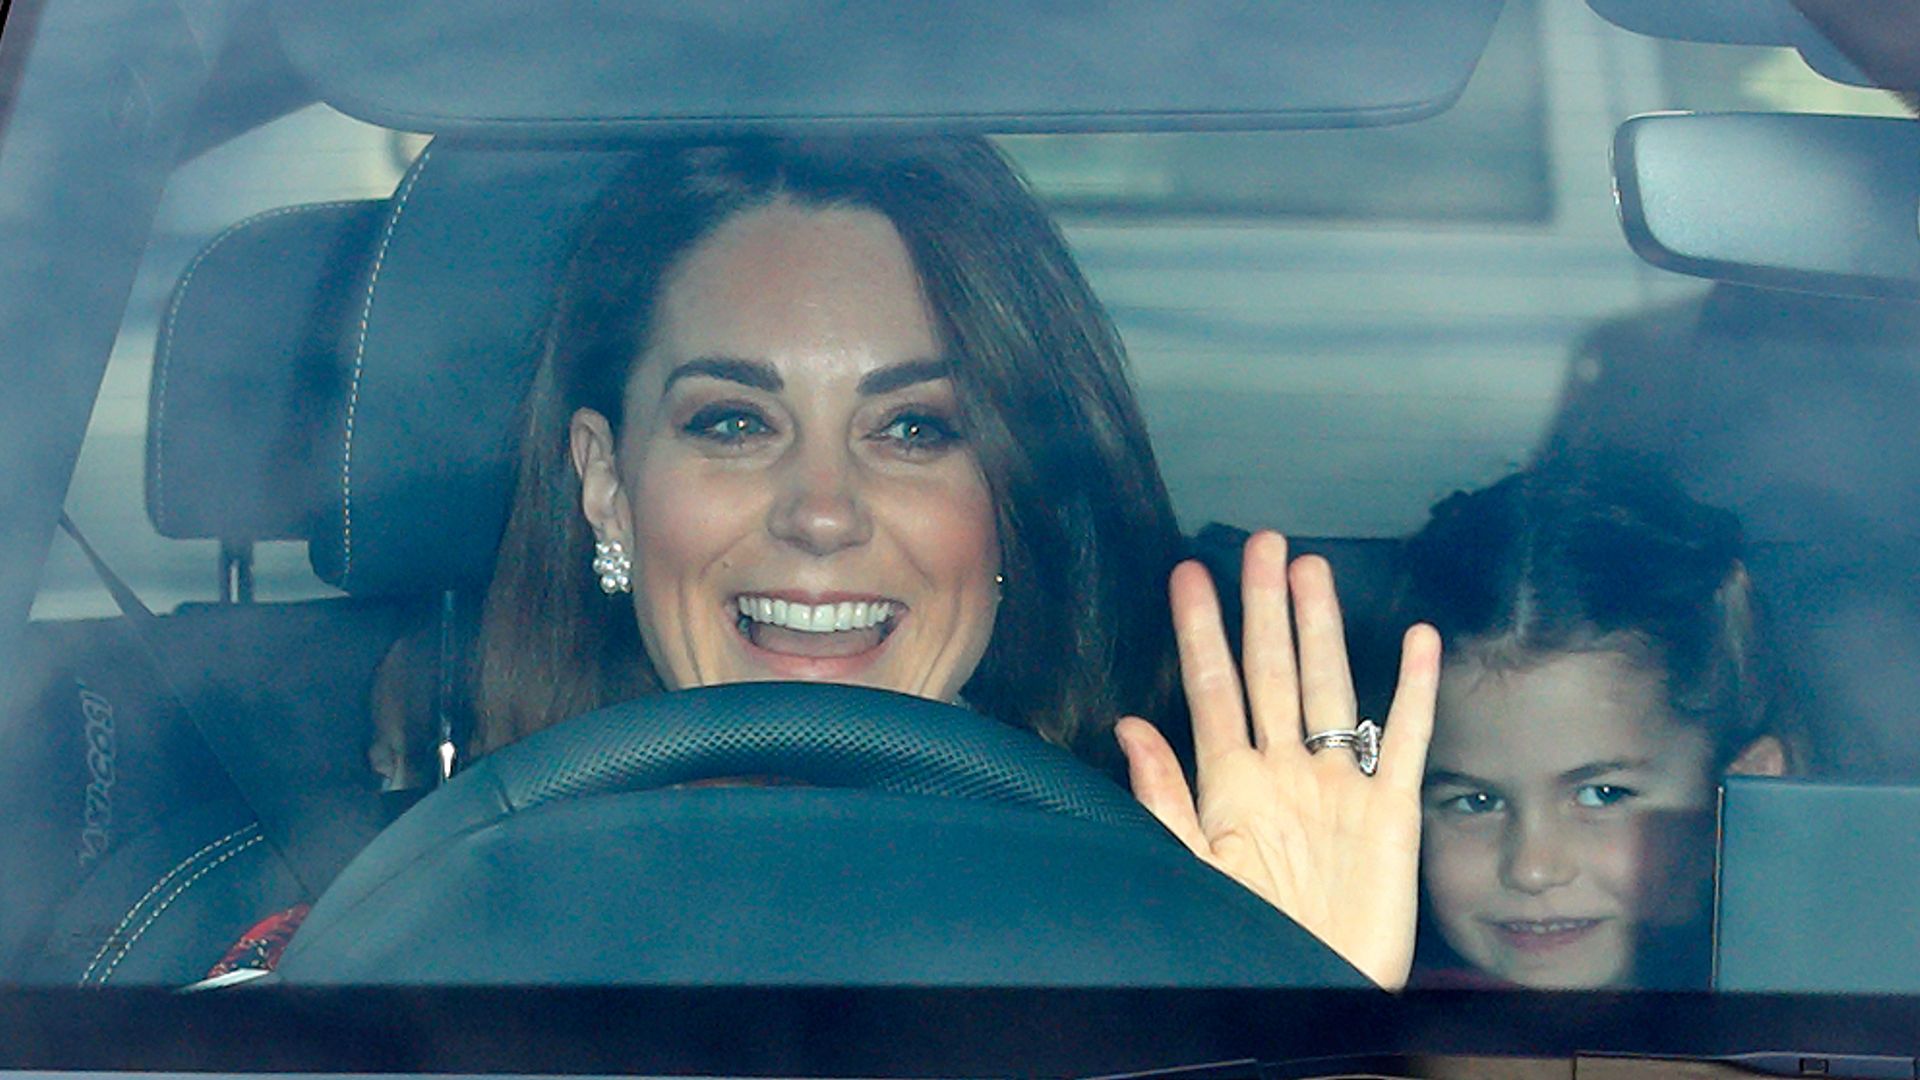 Kate Middleton waving while driving with Princess Charlotte in the back